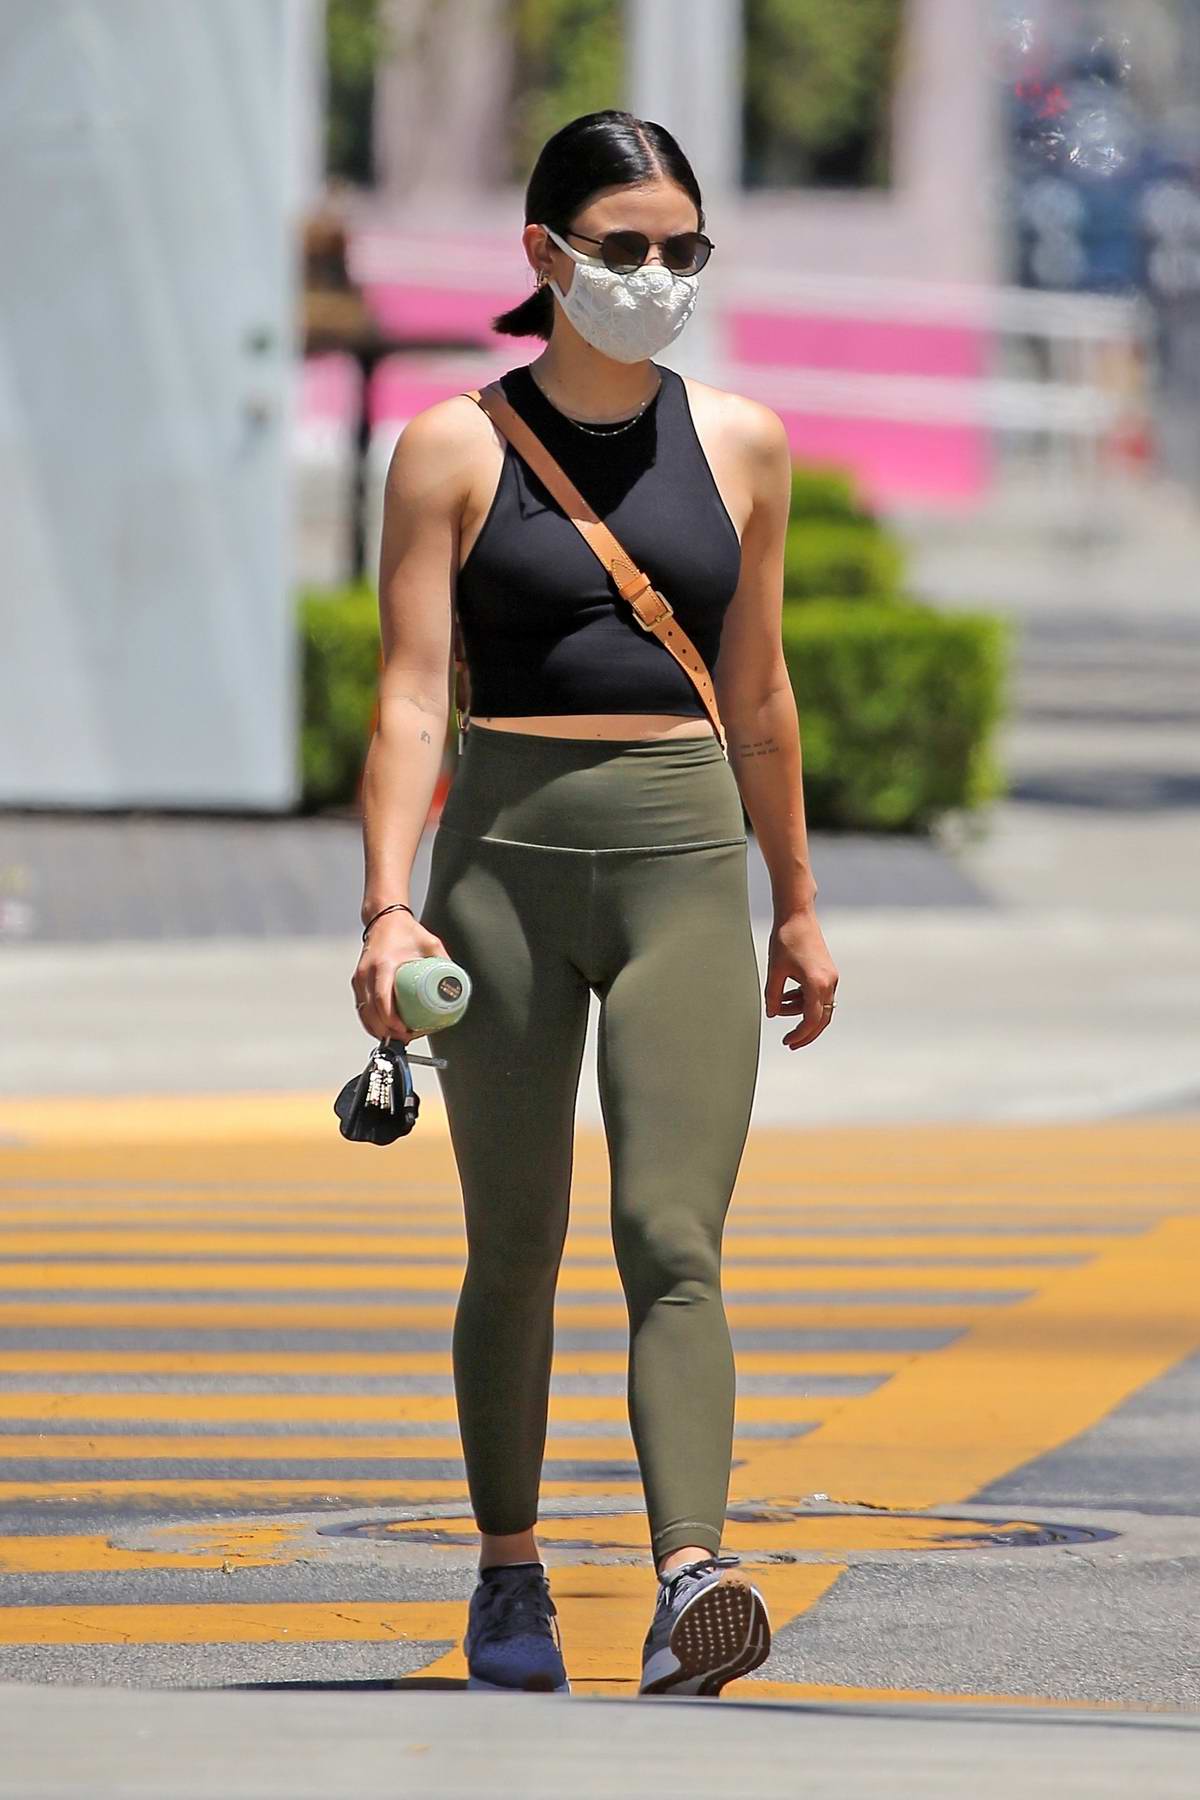 Lucy Hale rocks a crop top and olive green leggings during a juice